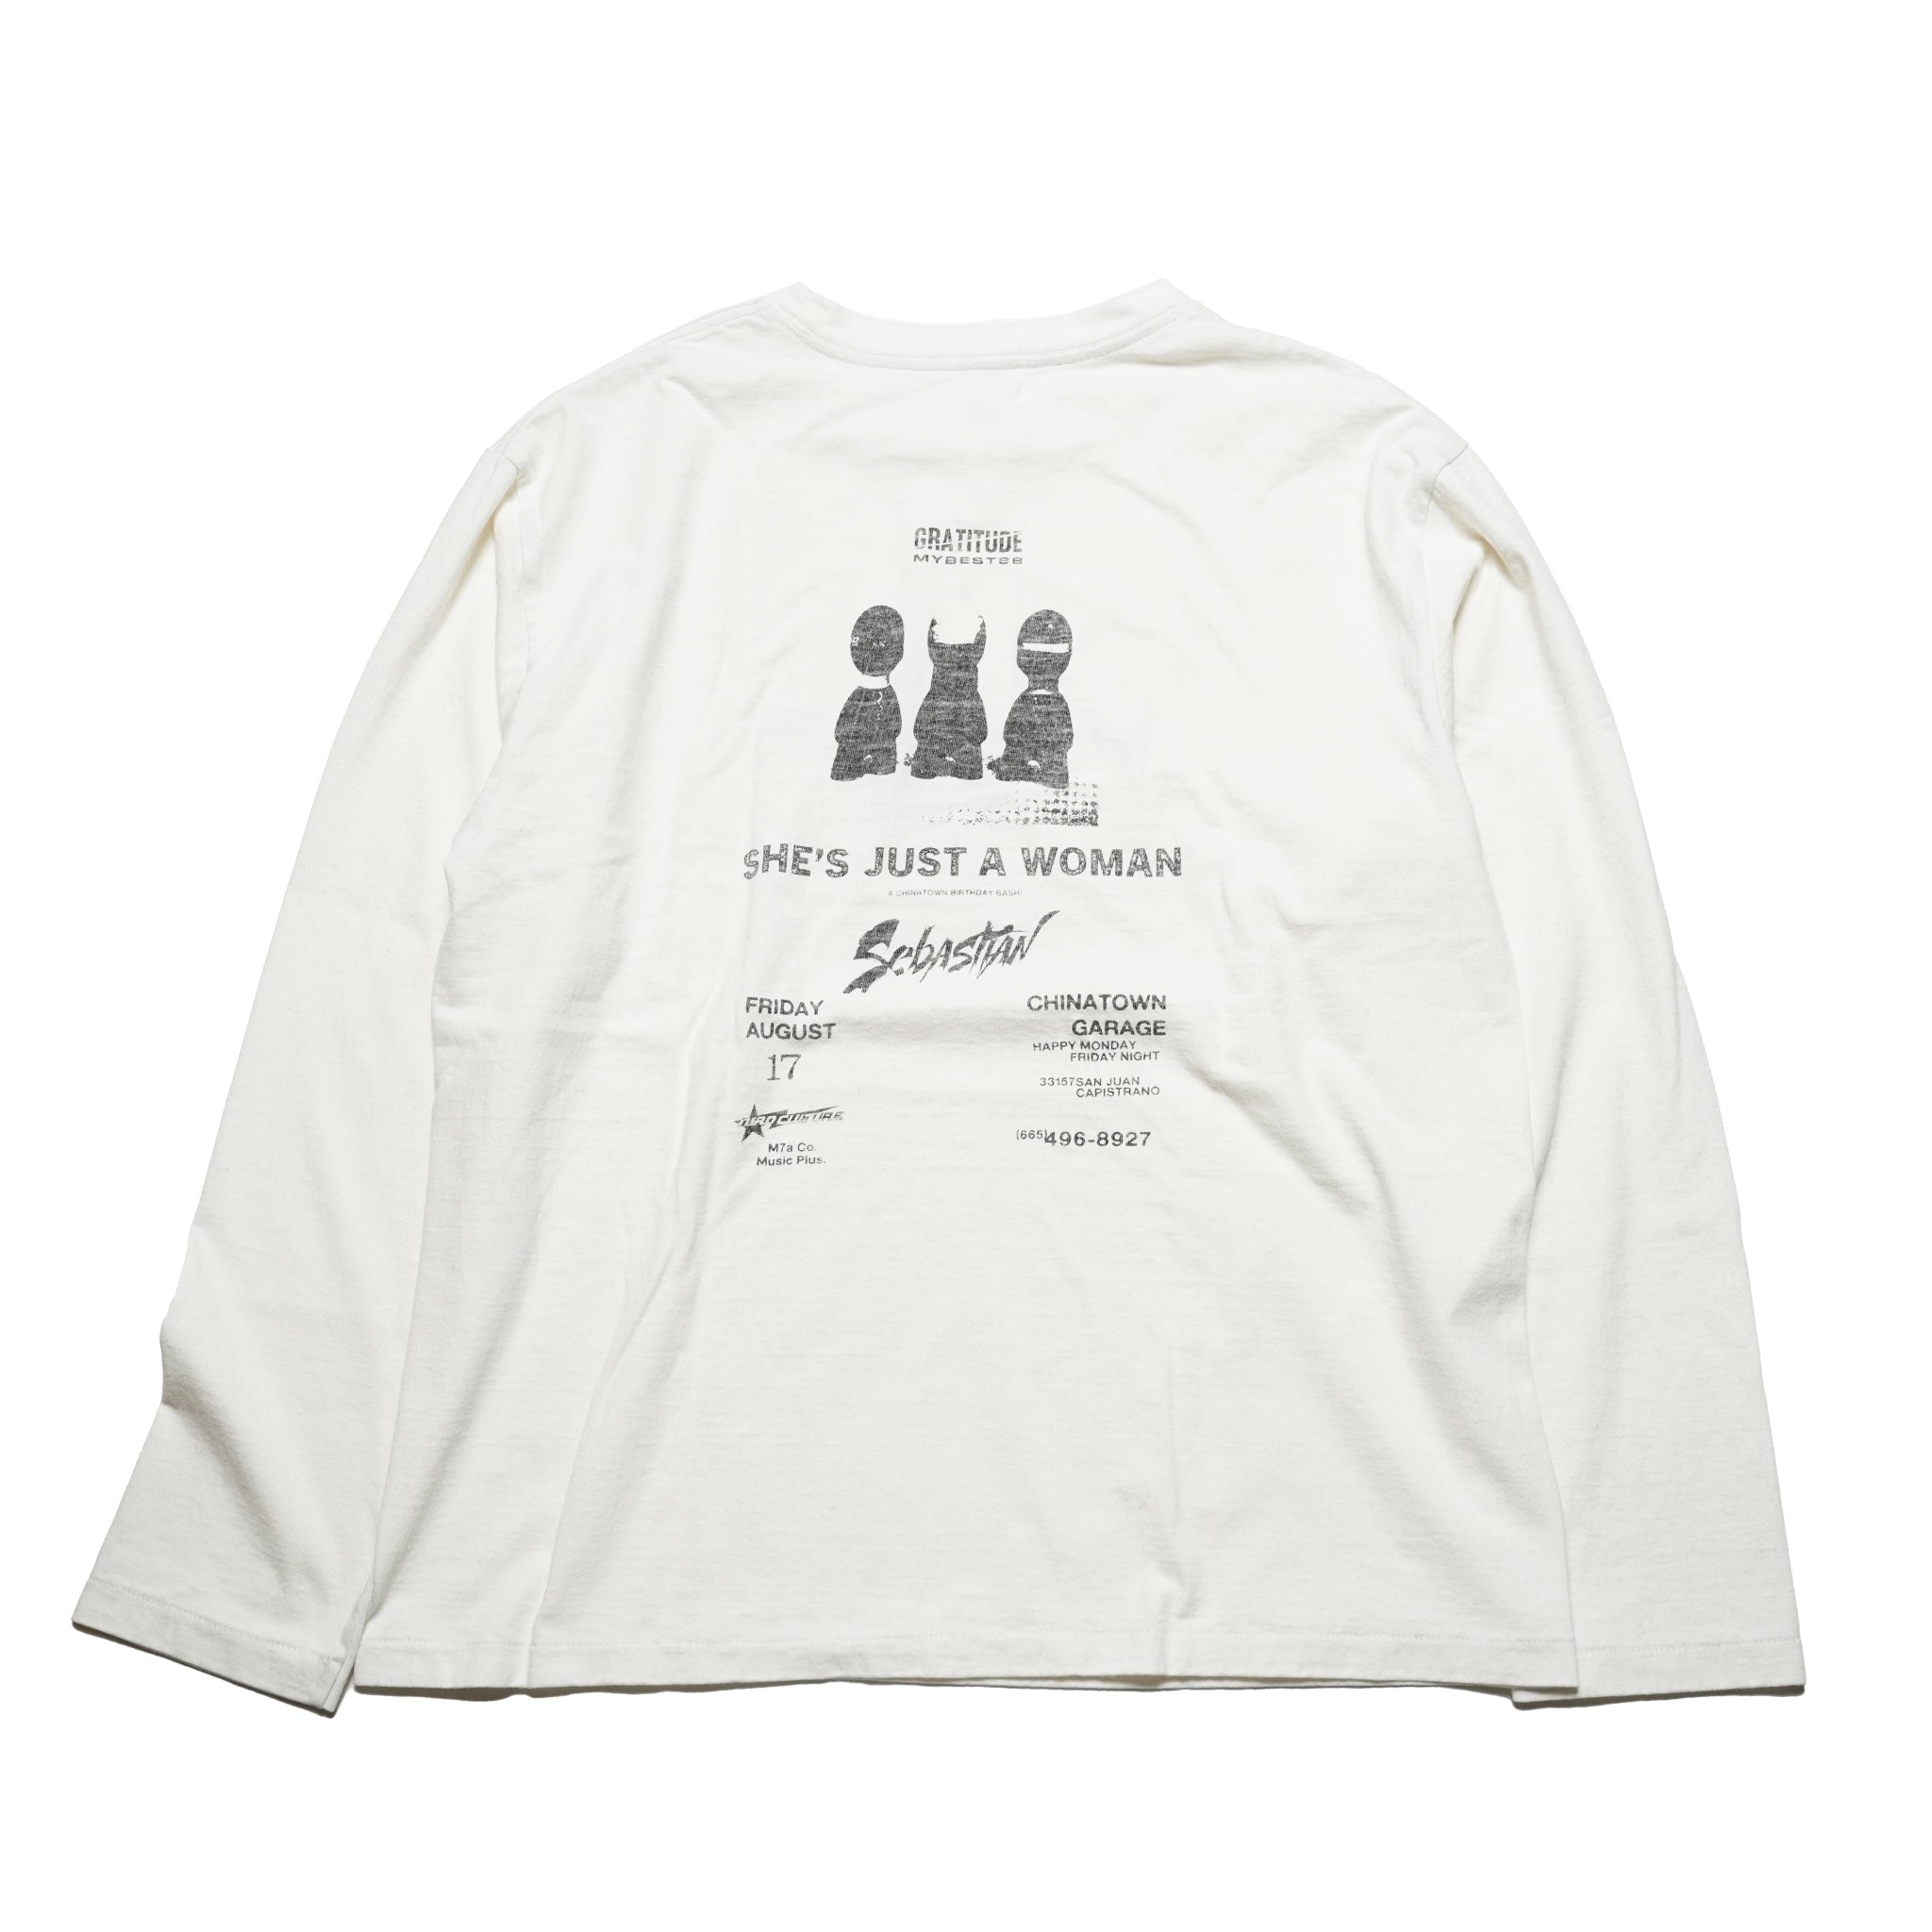 No:24＃03-5A30-0_White | Name:AVANT-GARDE-ロンTEE | Color:White【MINAMI ANDERSON_ミナミアンダーソン】【入荷予定アイテム・入荷連絡可能】